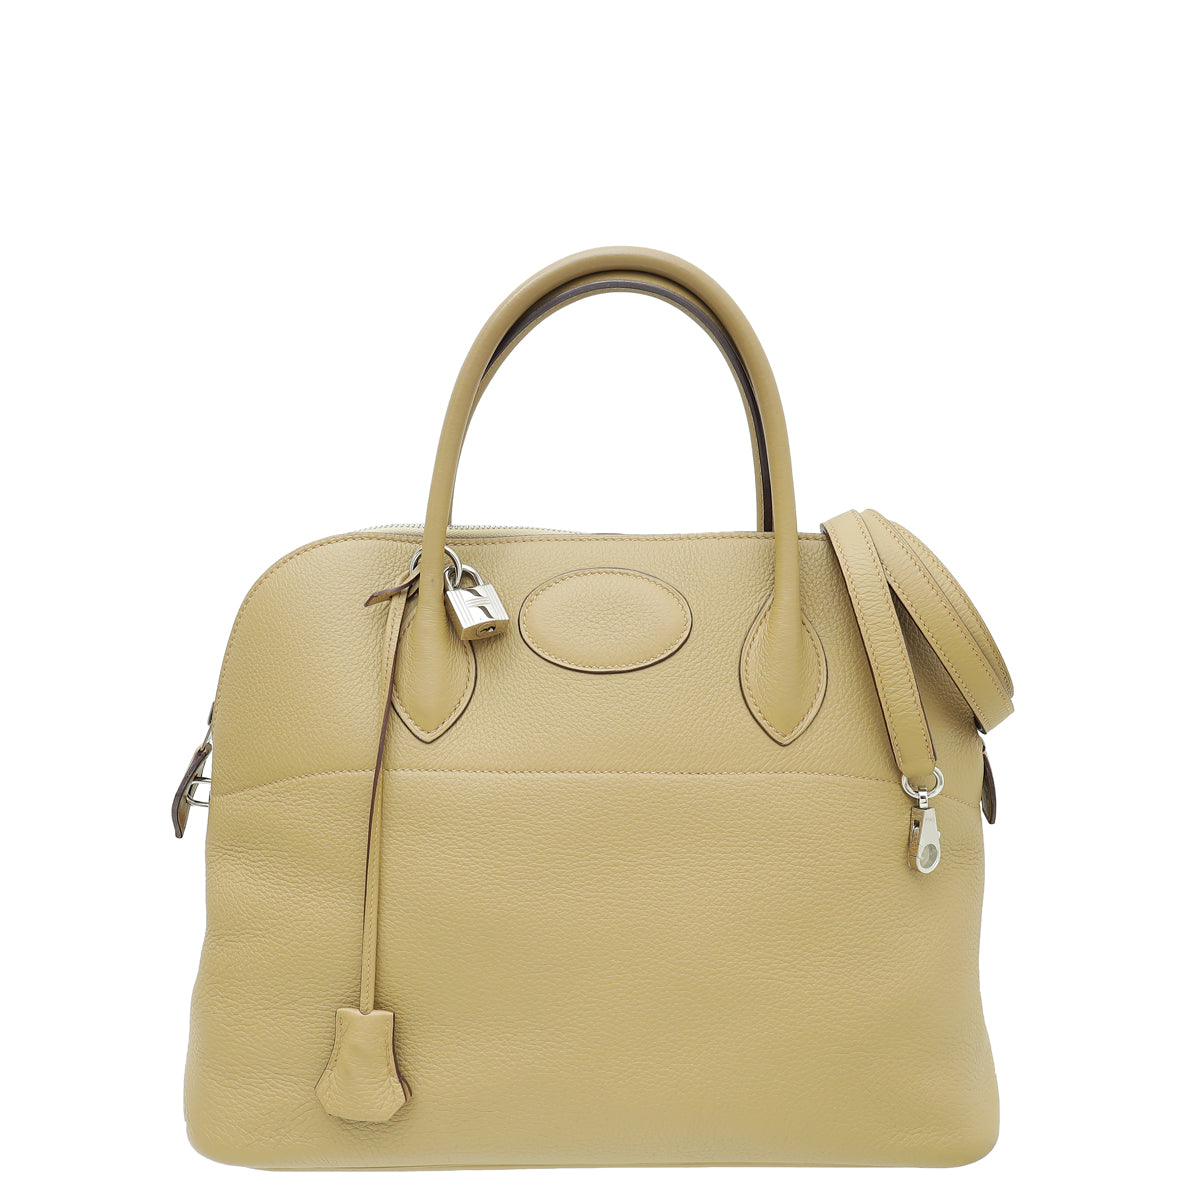 Hermes Poussiere Bolide 35 Bag